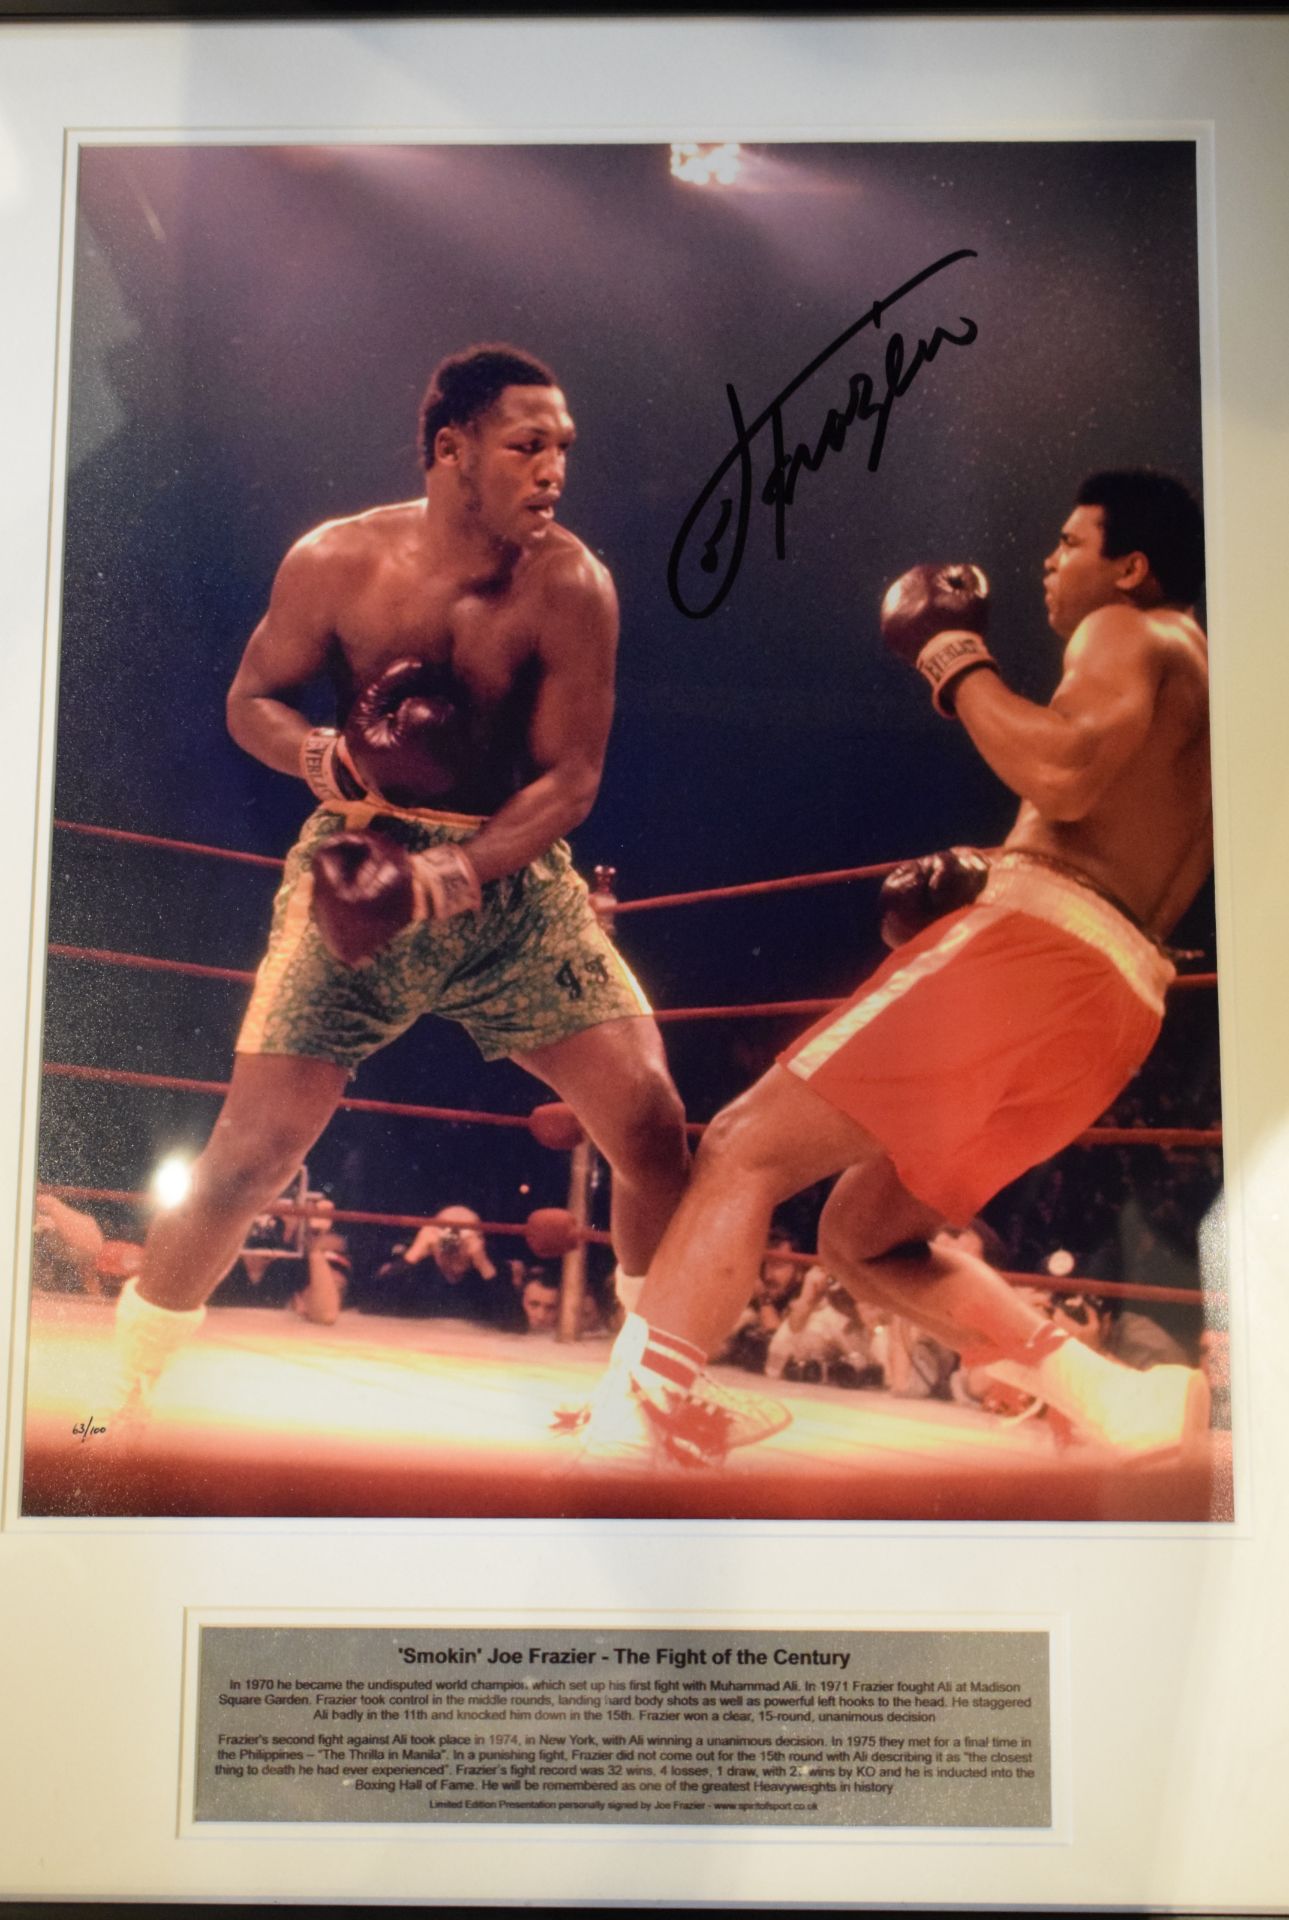 Excellent Signed Photograph of Joe Frazier knocking down Ali in 'The Fight Of The Century'